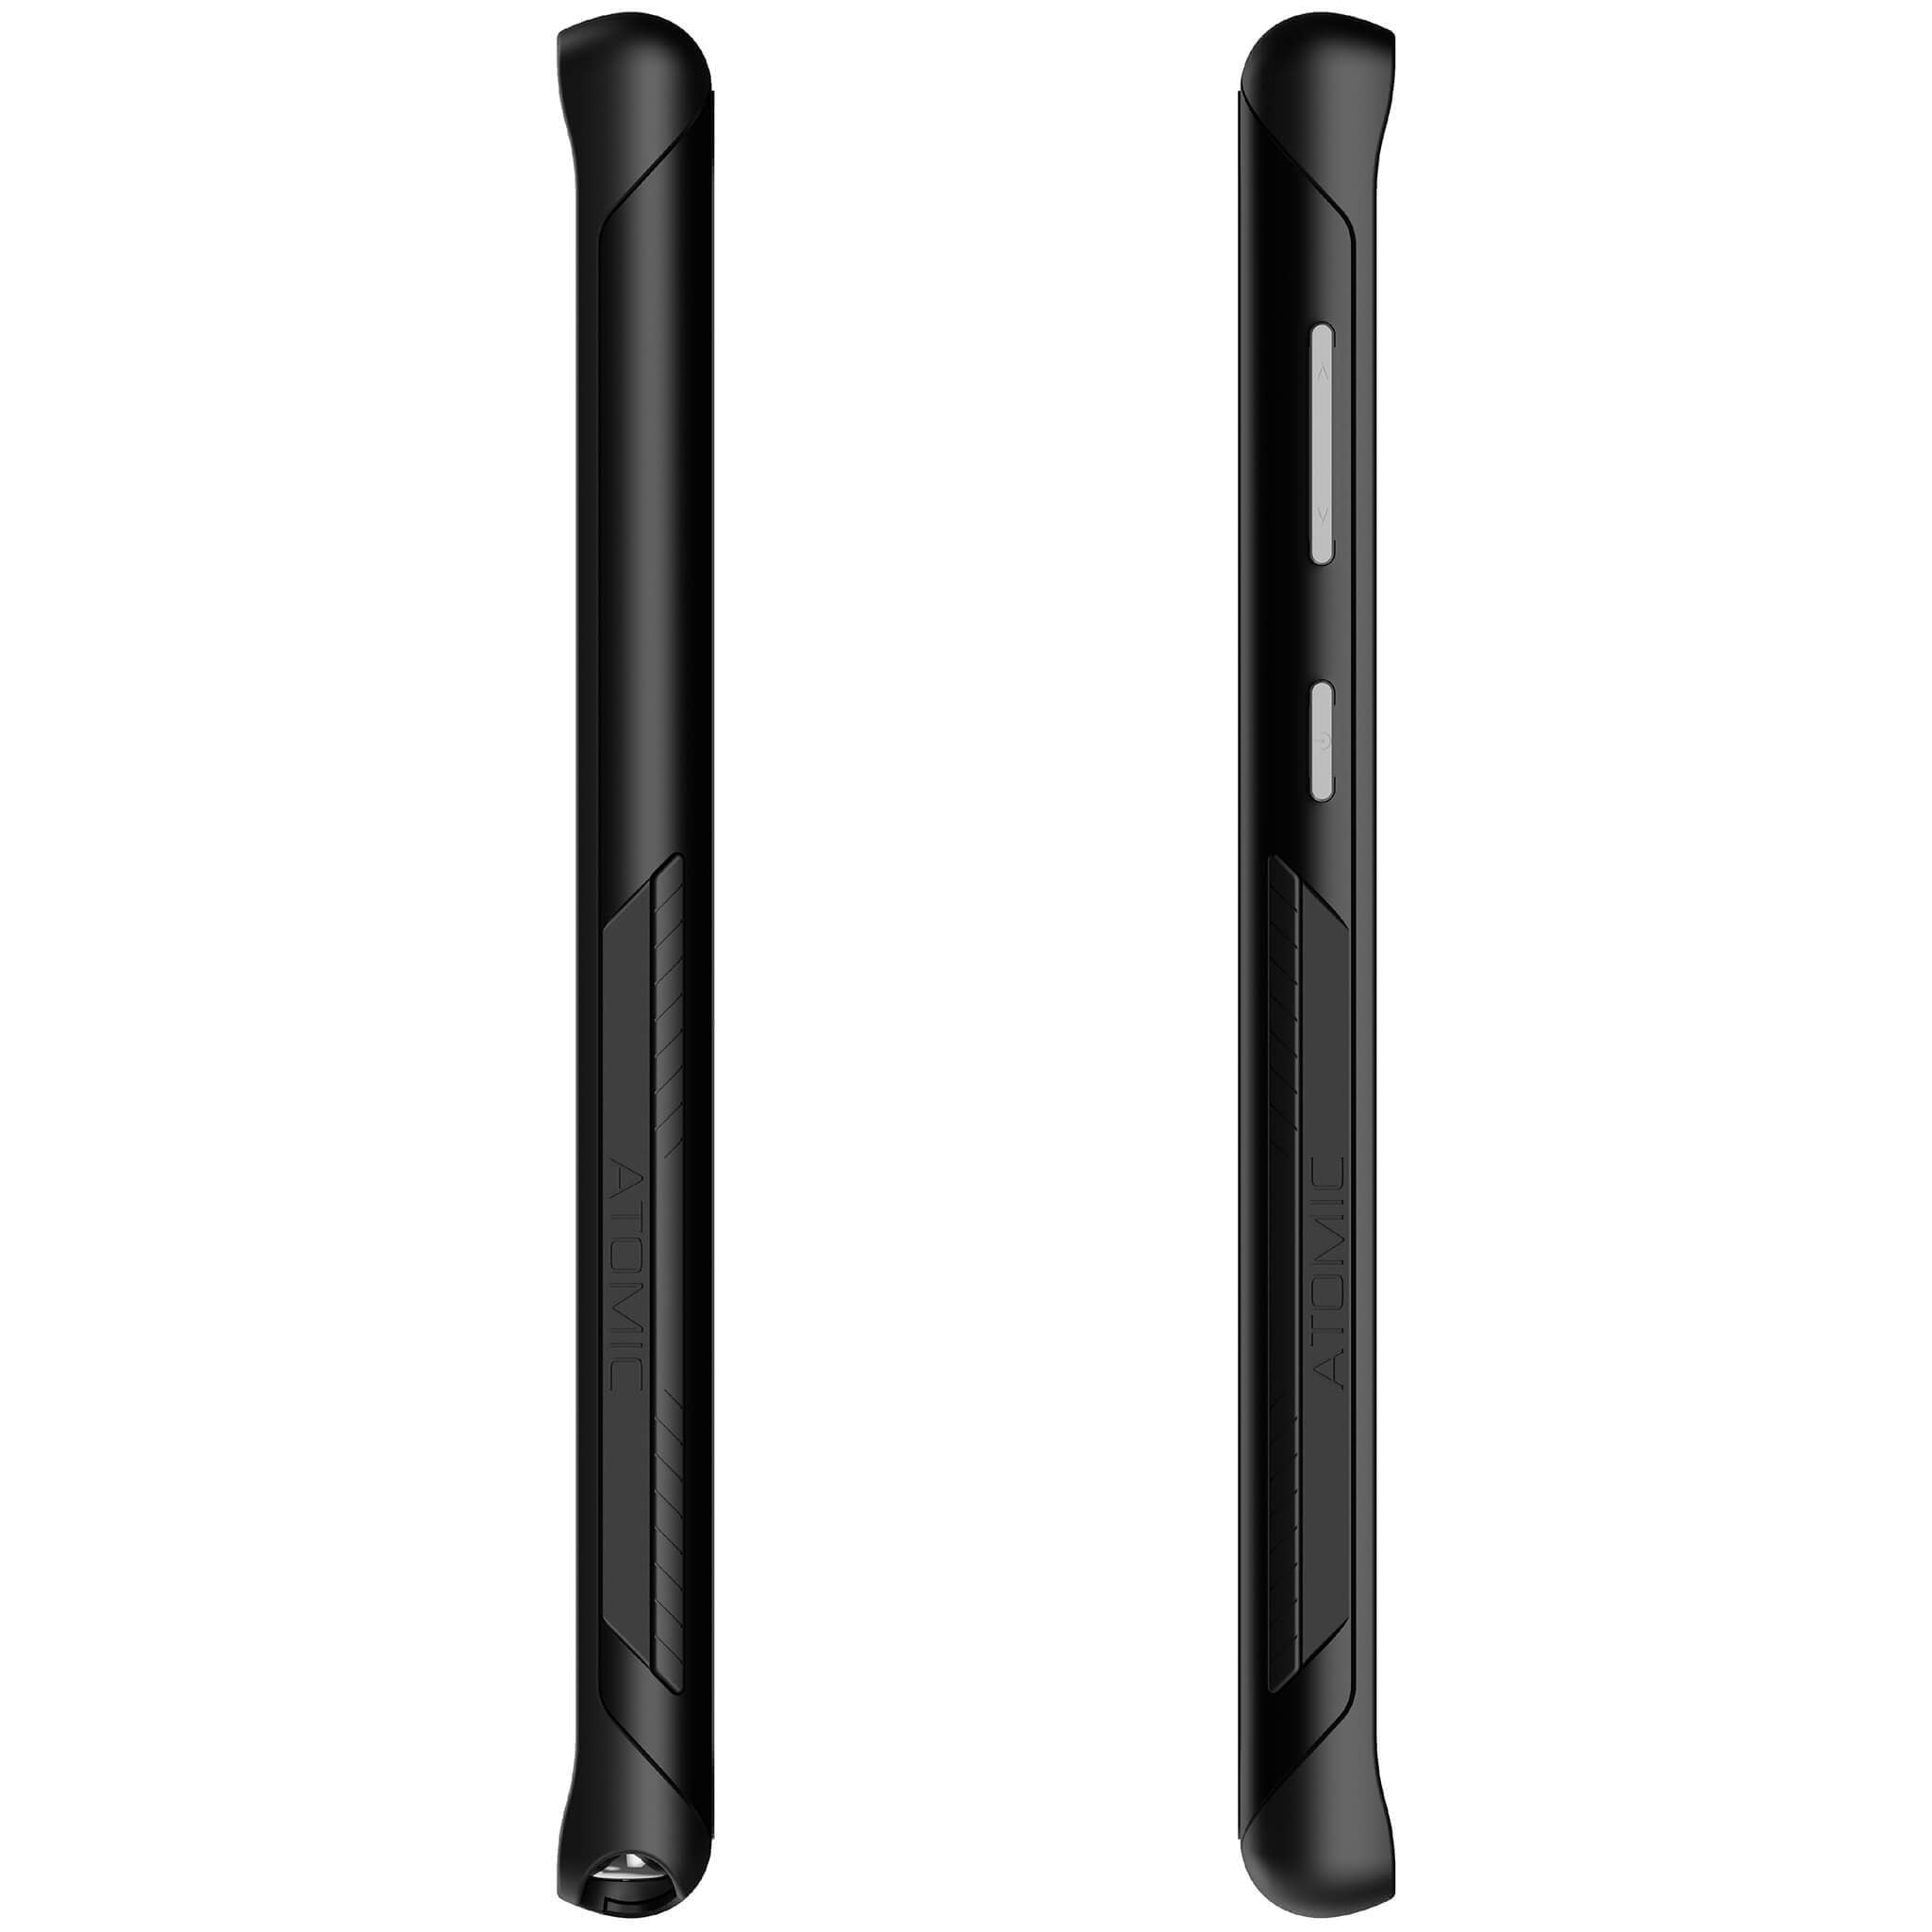 ATOMIC SLIM Cases for Note 10 Series